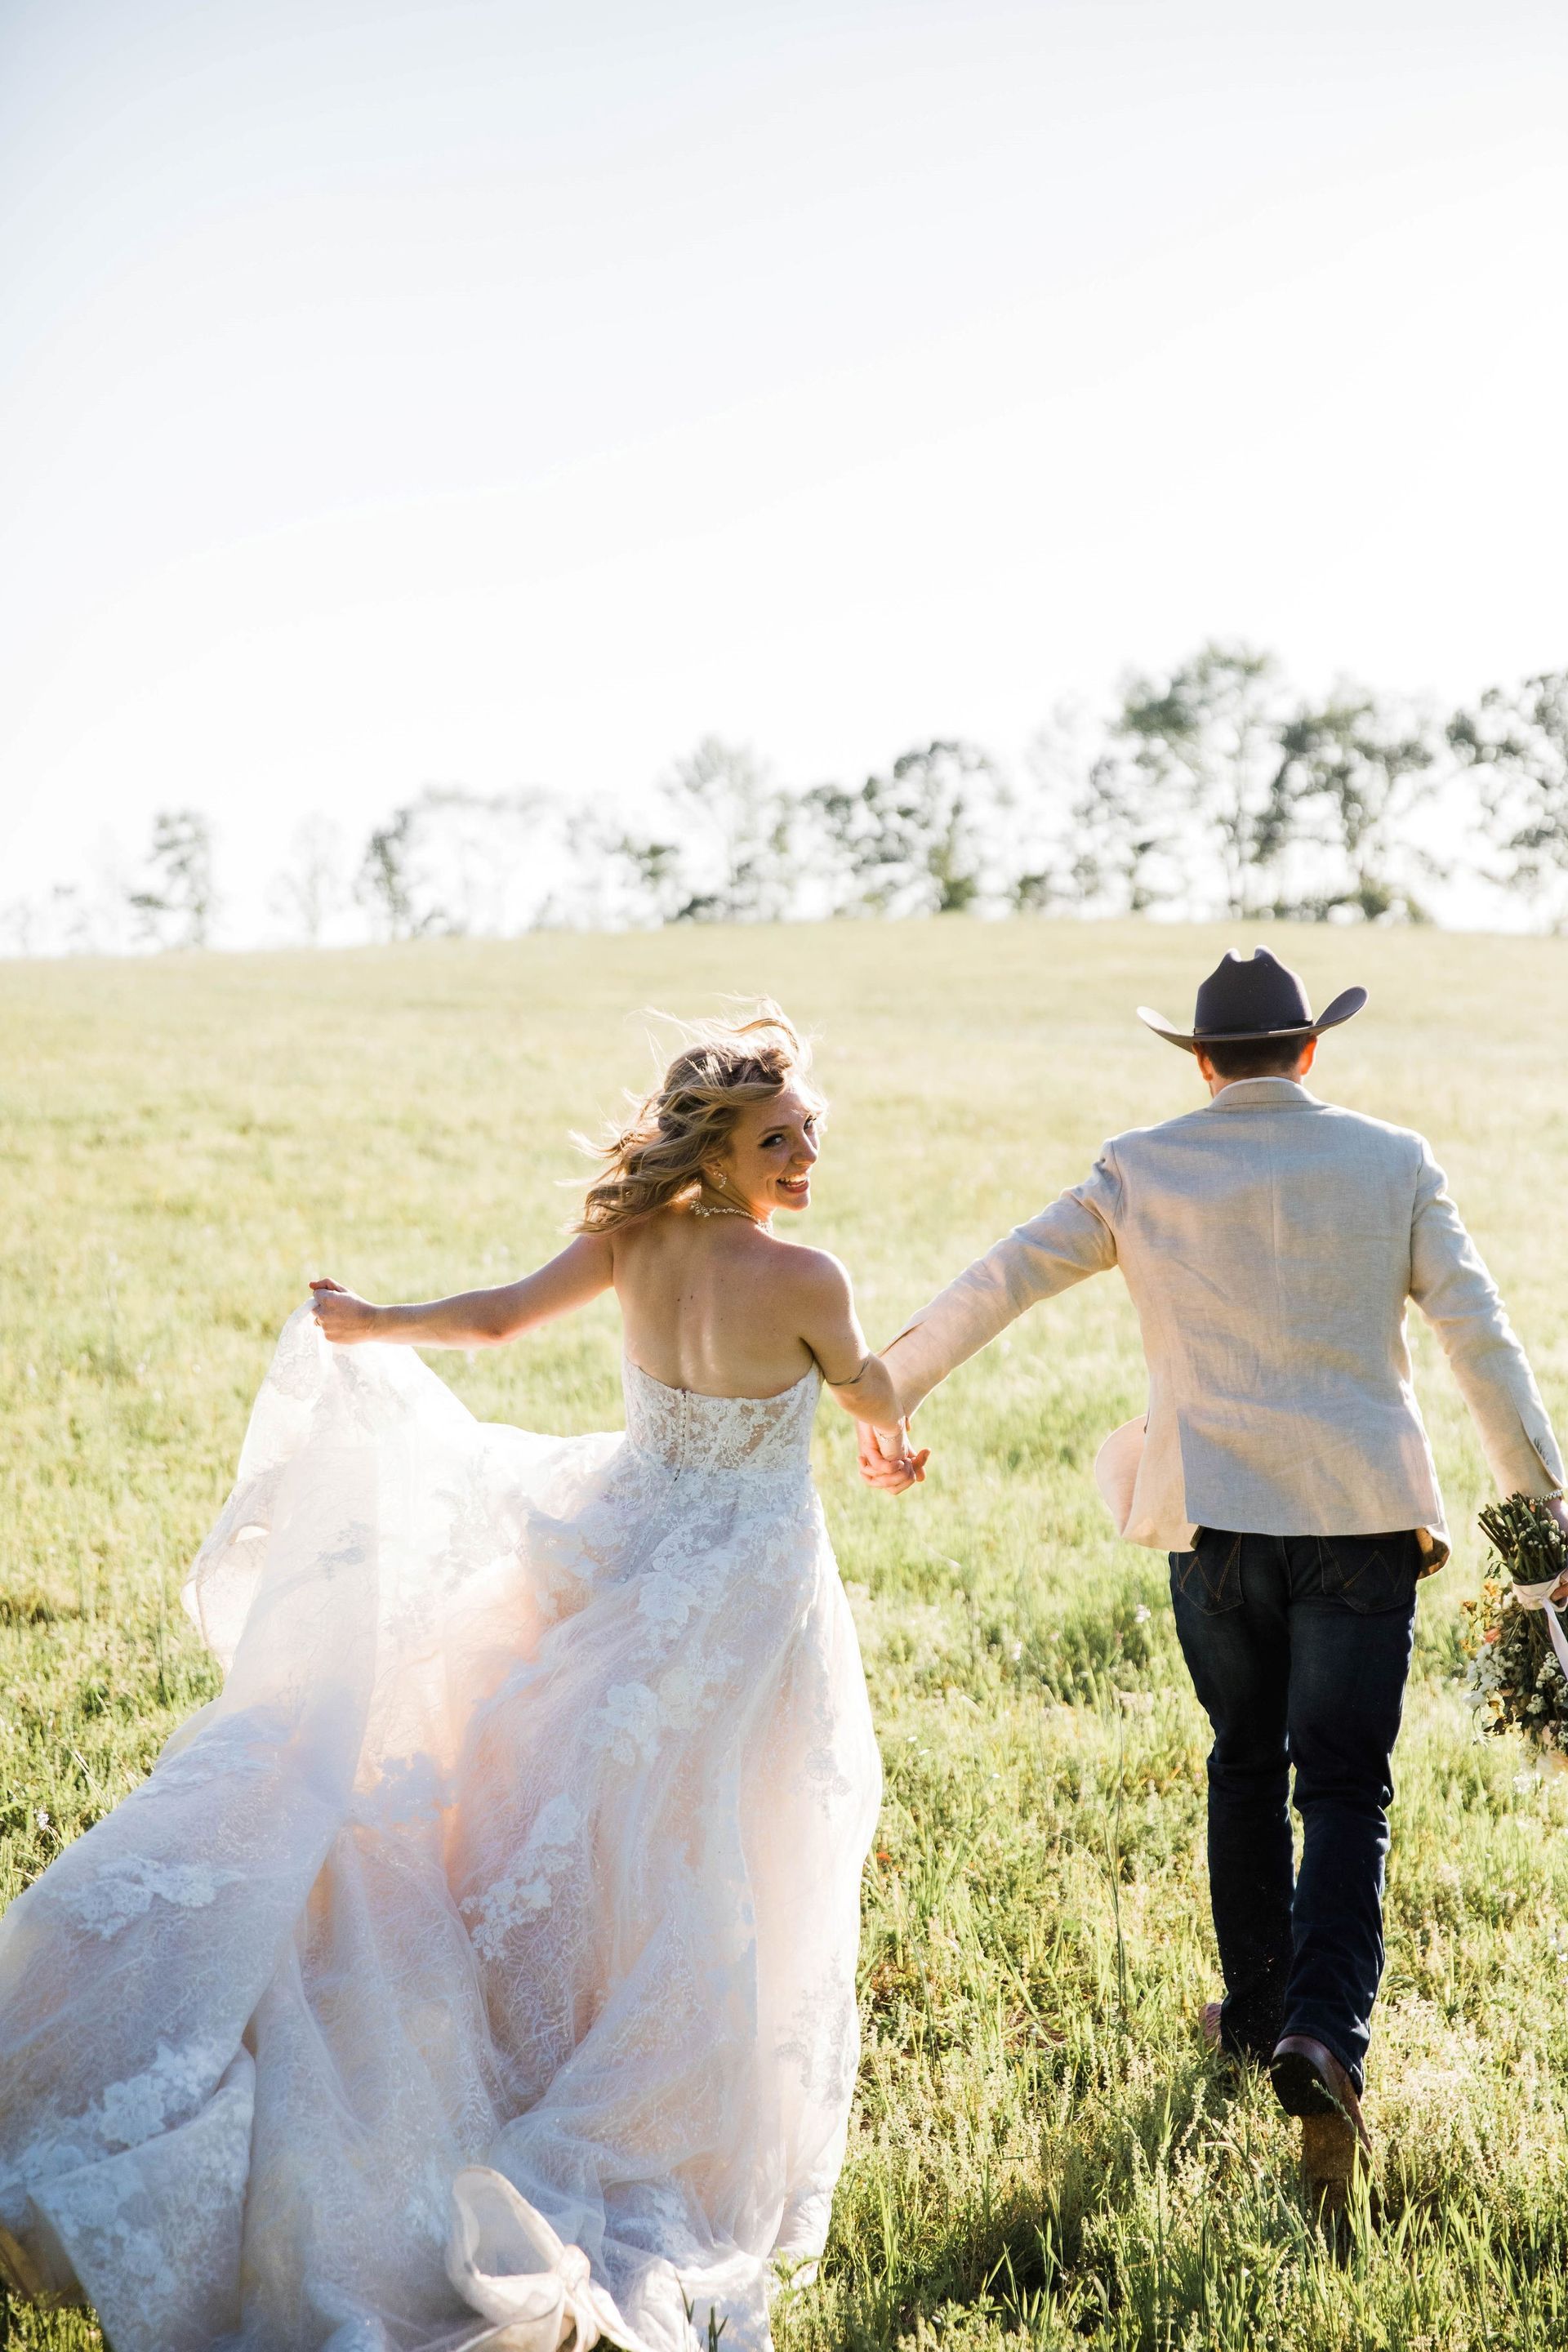 a bride and groom are running through a grassy field holding hands .